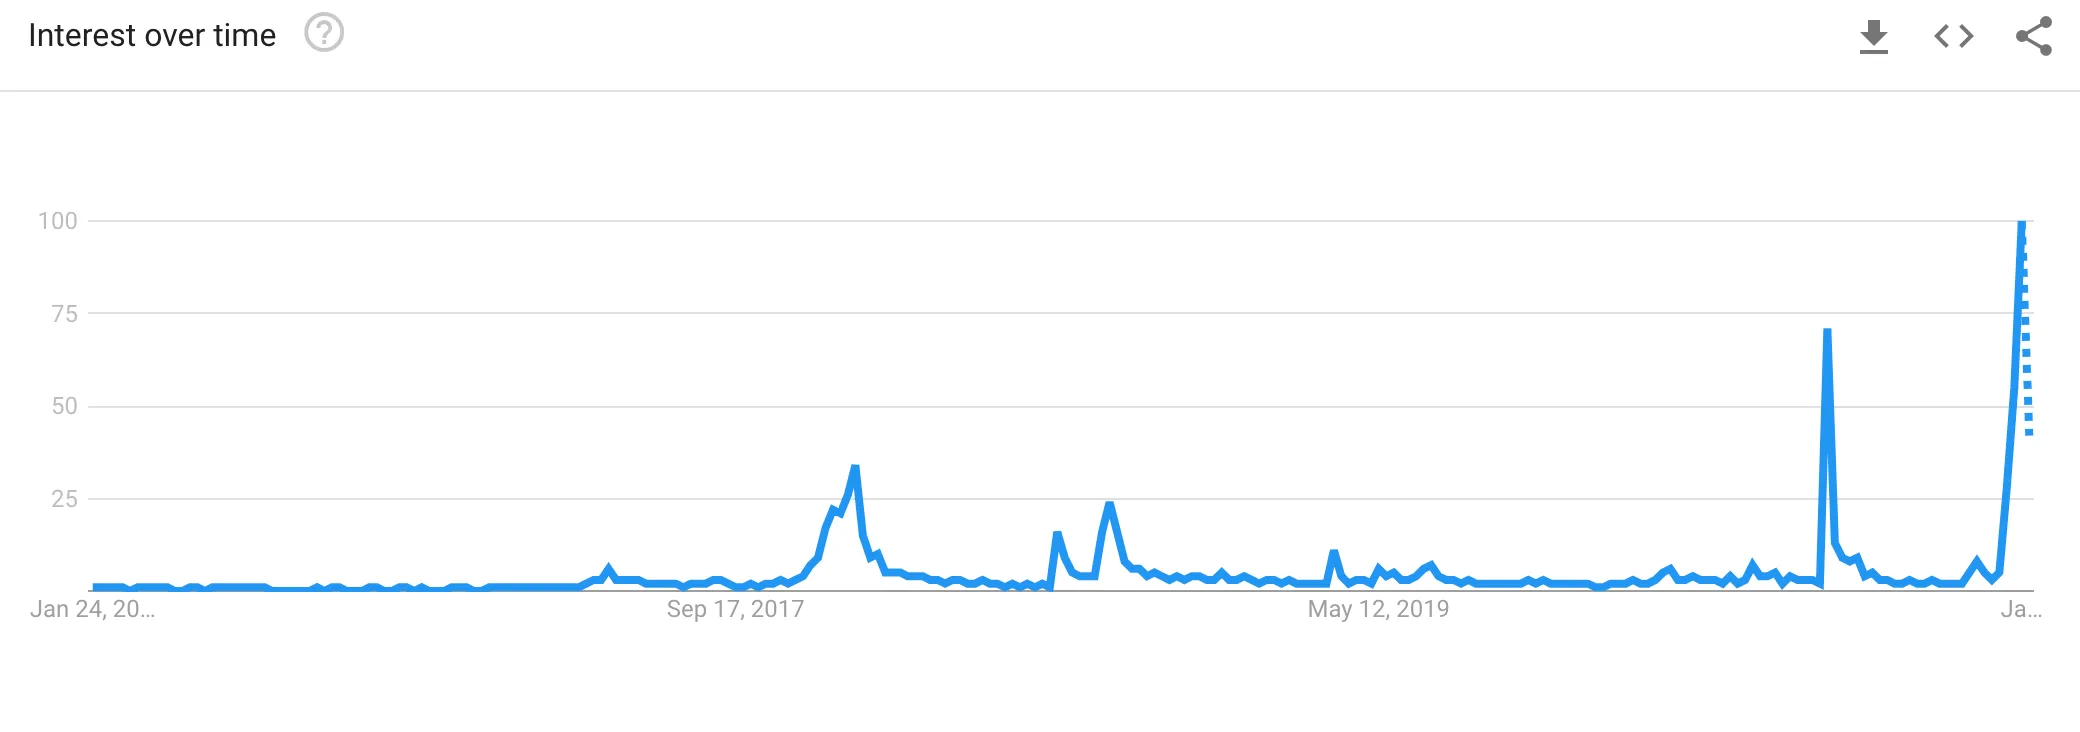 Google Search trends for "Dogecoin" over the last 5 years. Image: Google